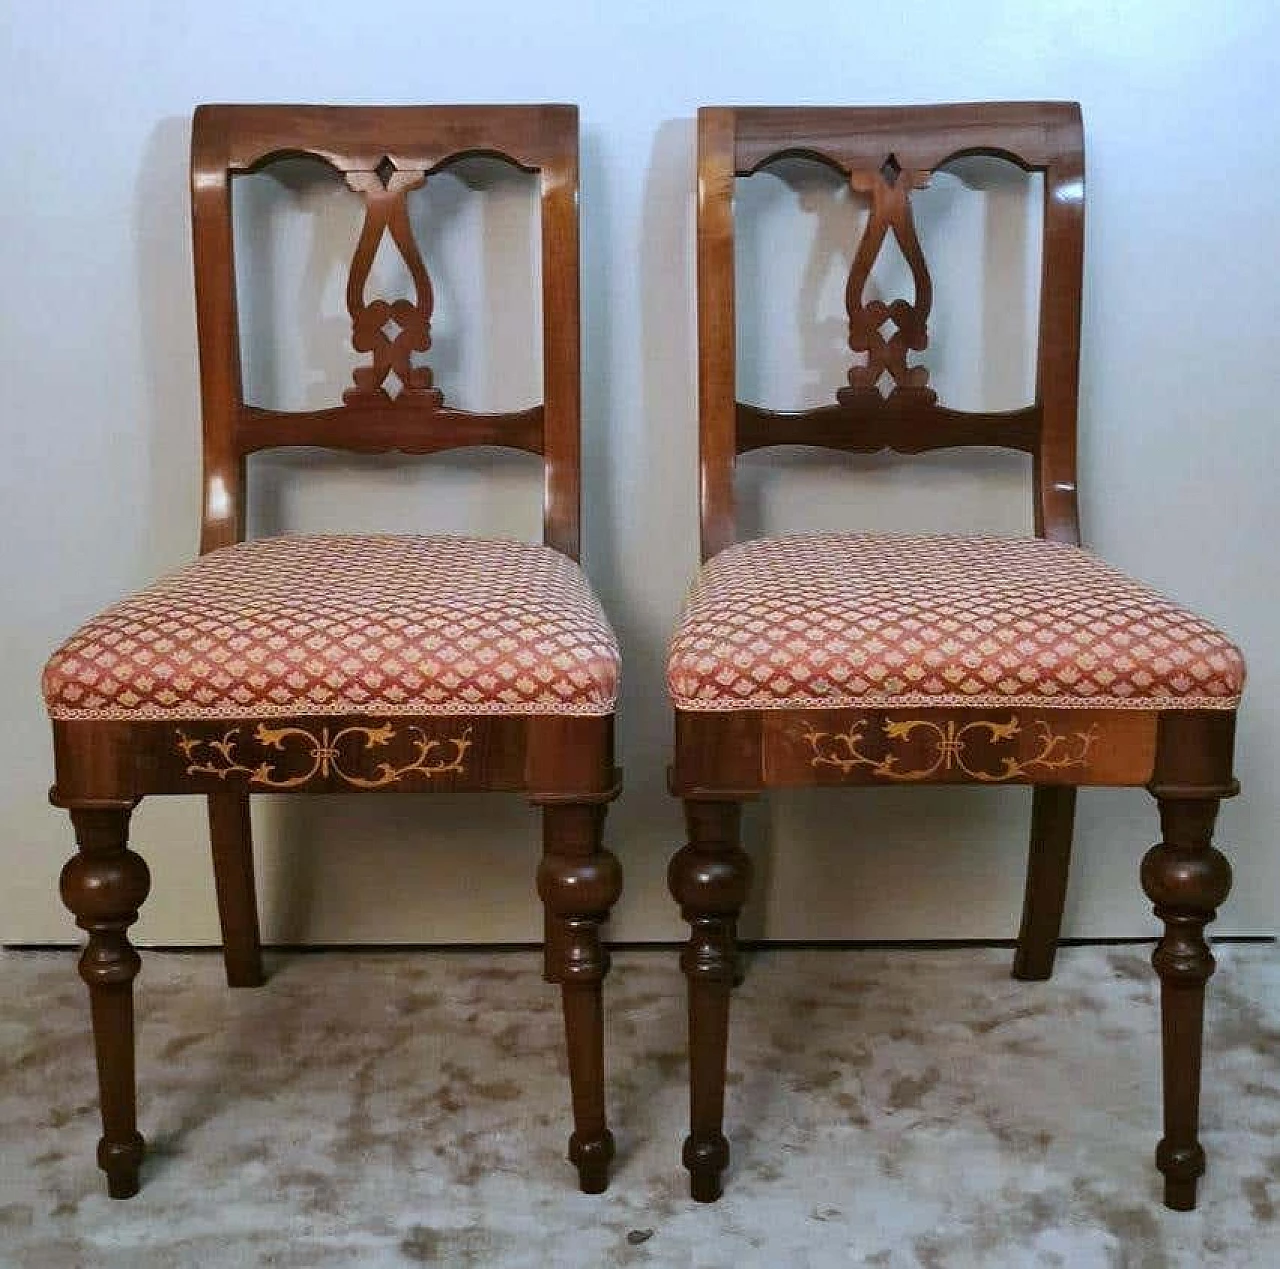 4 Biedermeier style wooden and fabric chairs, mid-19th century 7